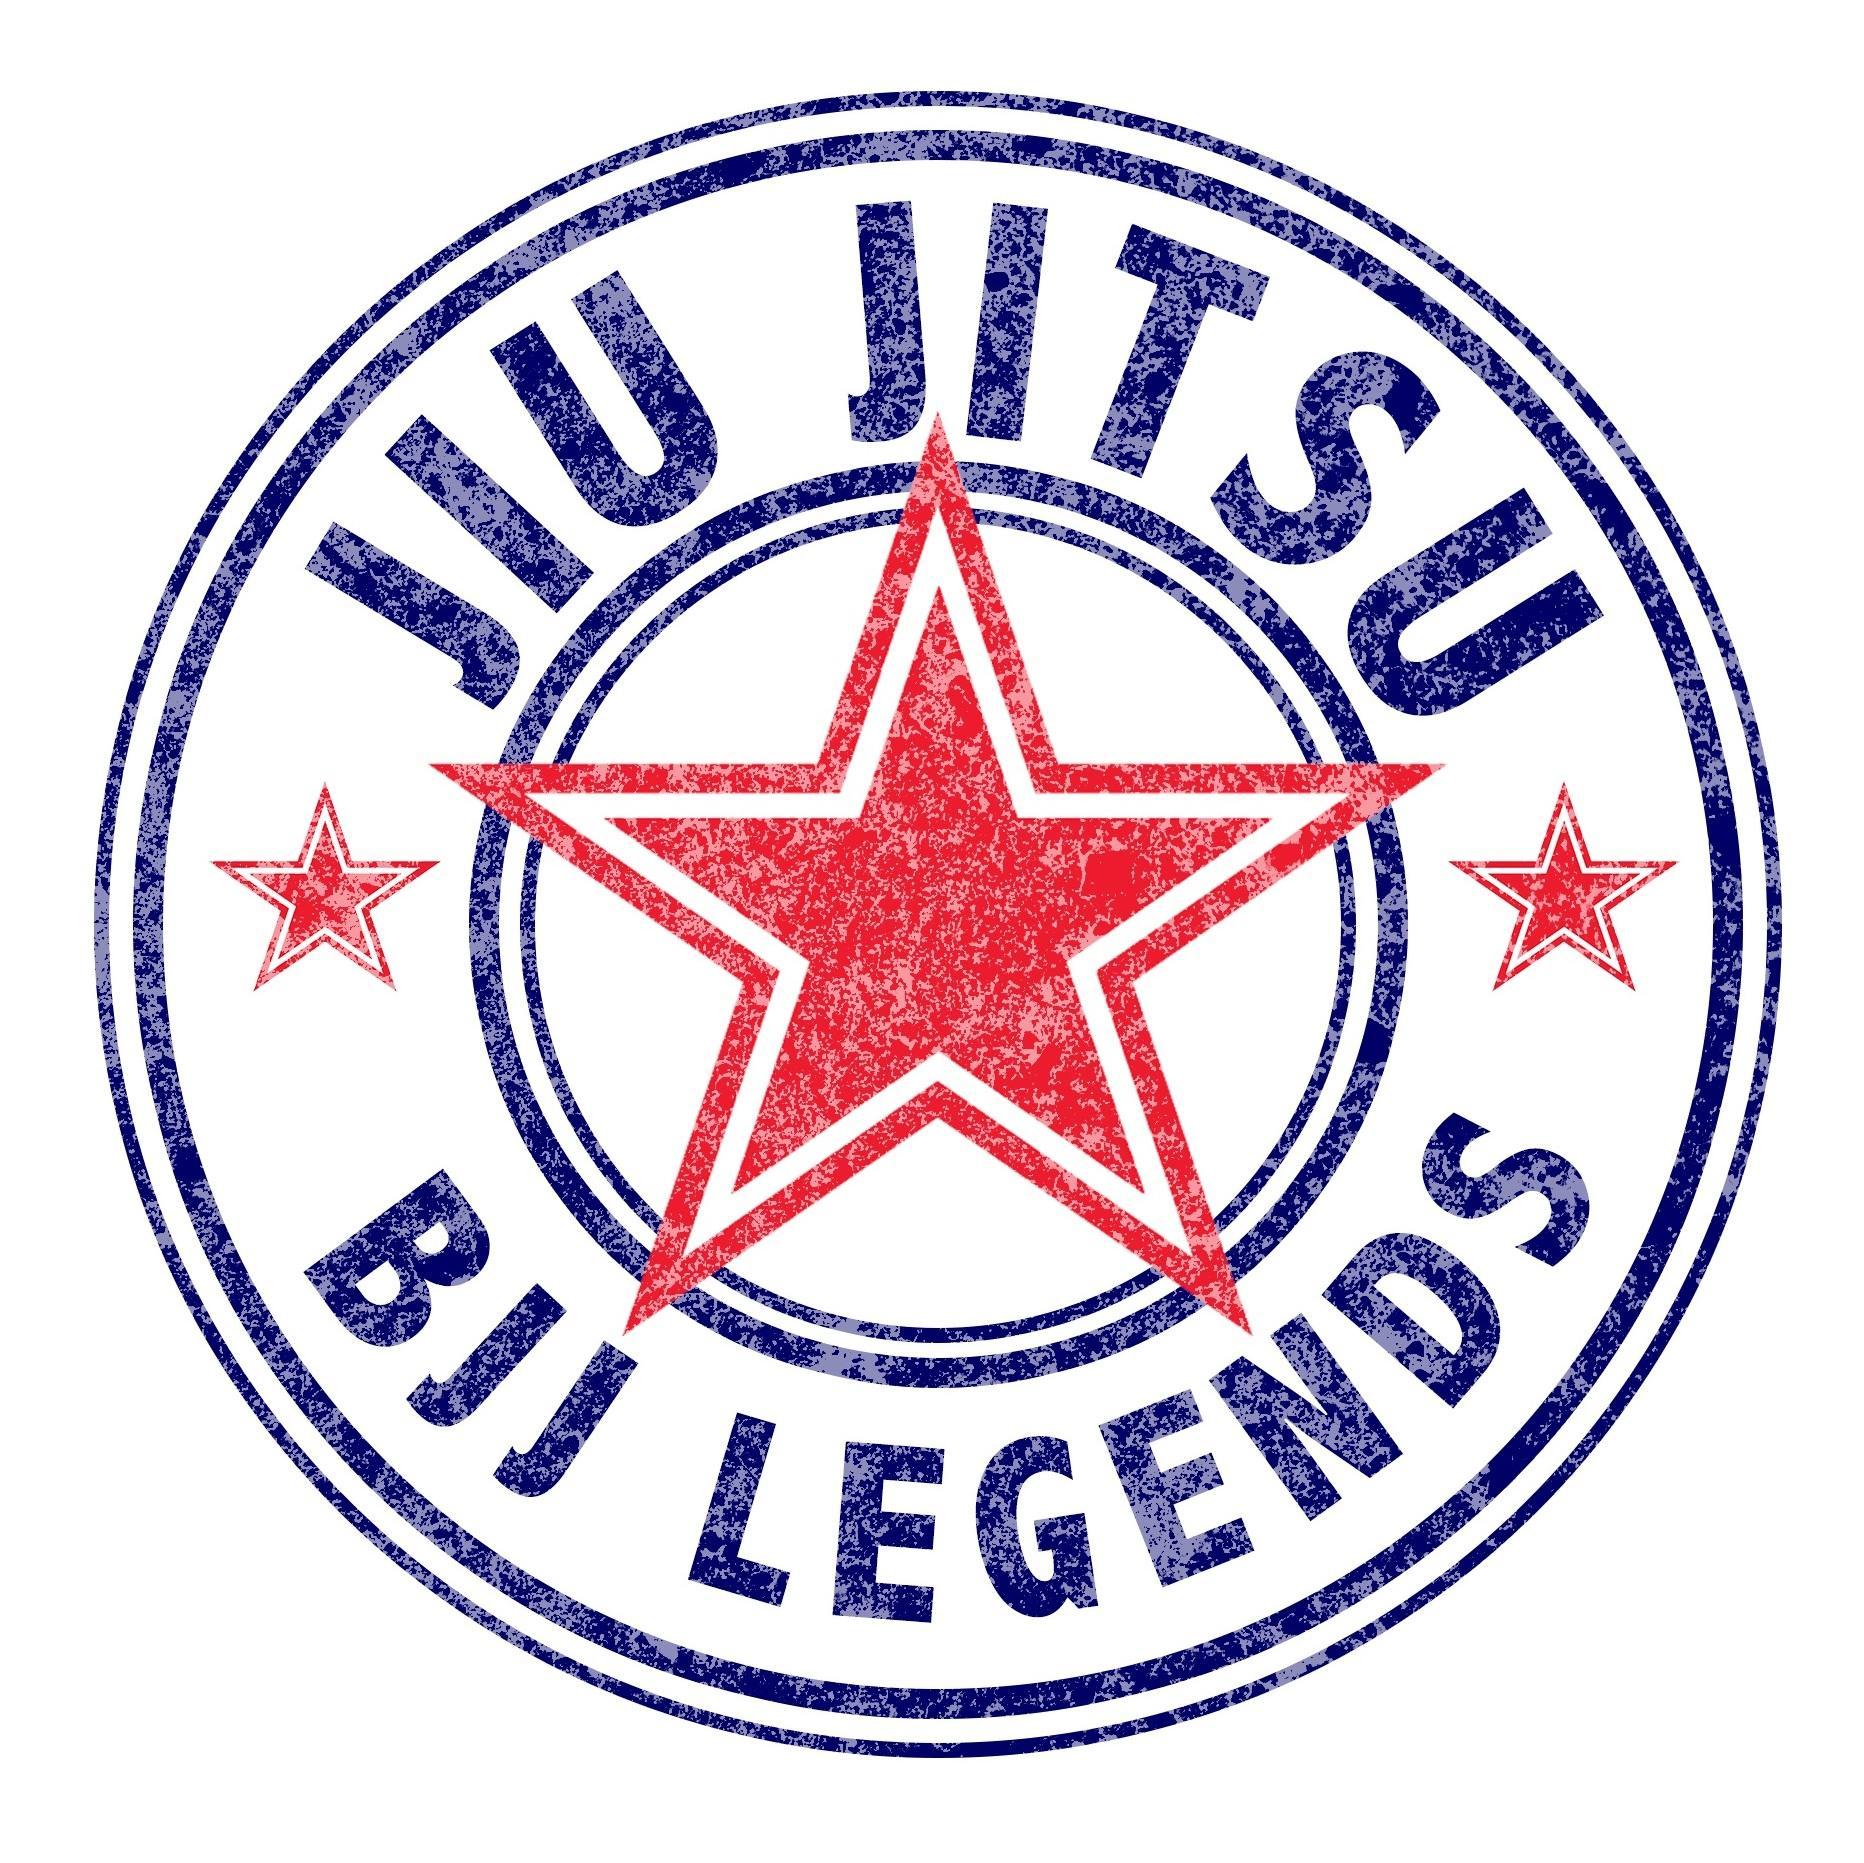 Jiu-Jitsu Magazine, BJJ Legends, devoted to BJJ, MMA & Grappling includes DVD - submissions and Mobile BJJ Video, Techniques, news daily at the site.